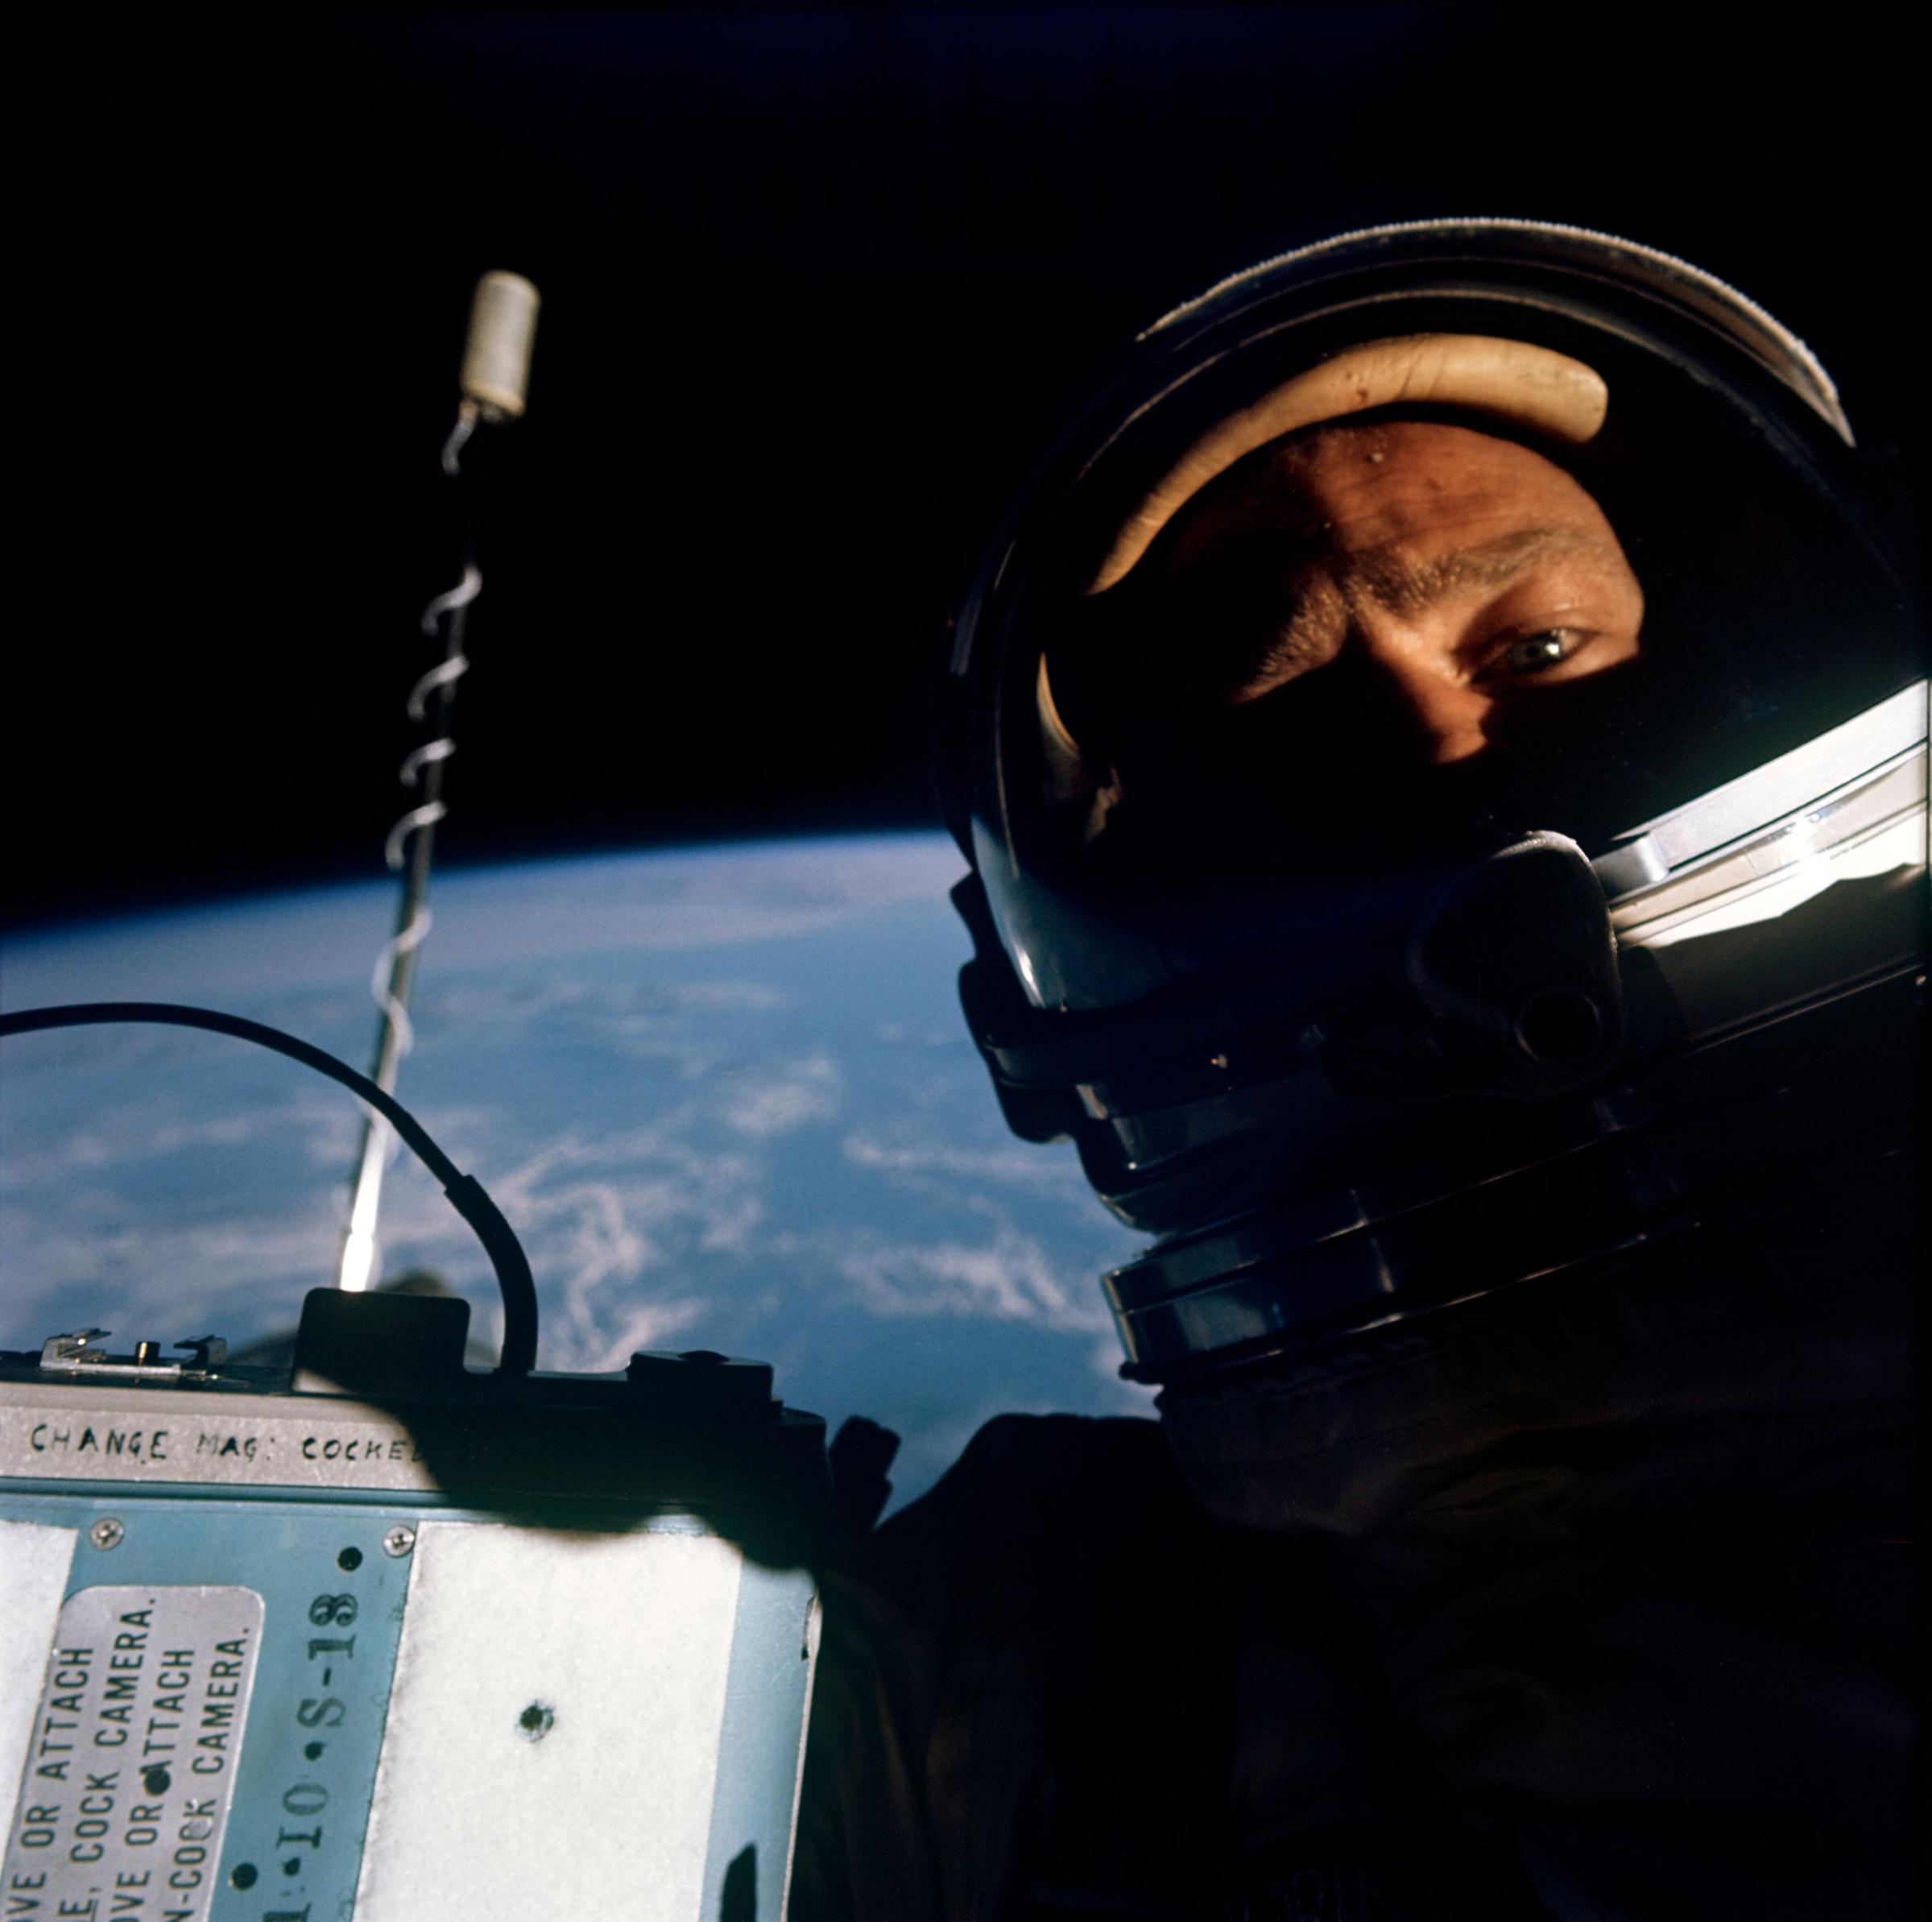 Buzz Aldrin space selfie during his Gemini 12 mission in 1966.